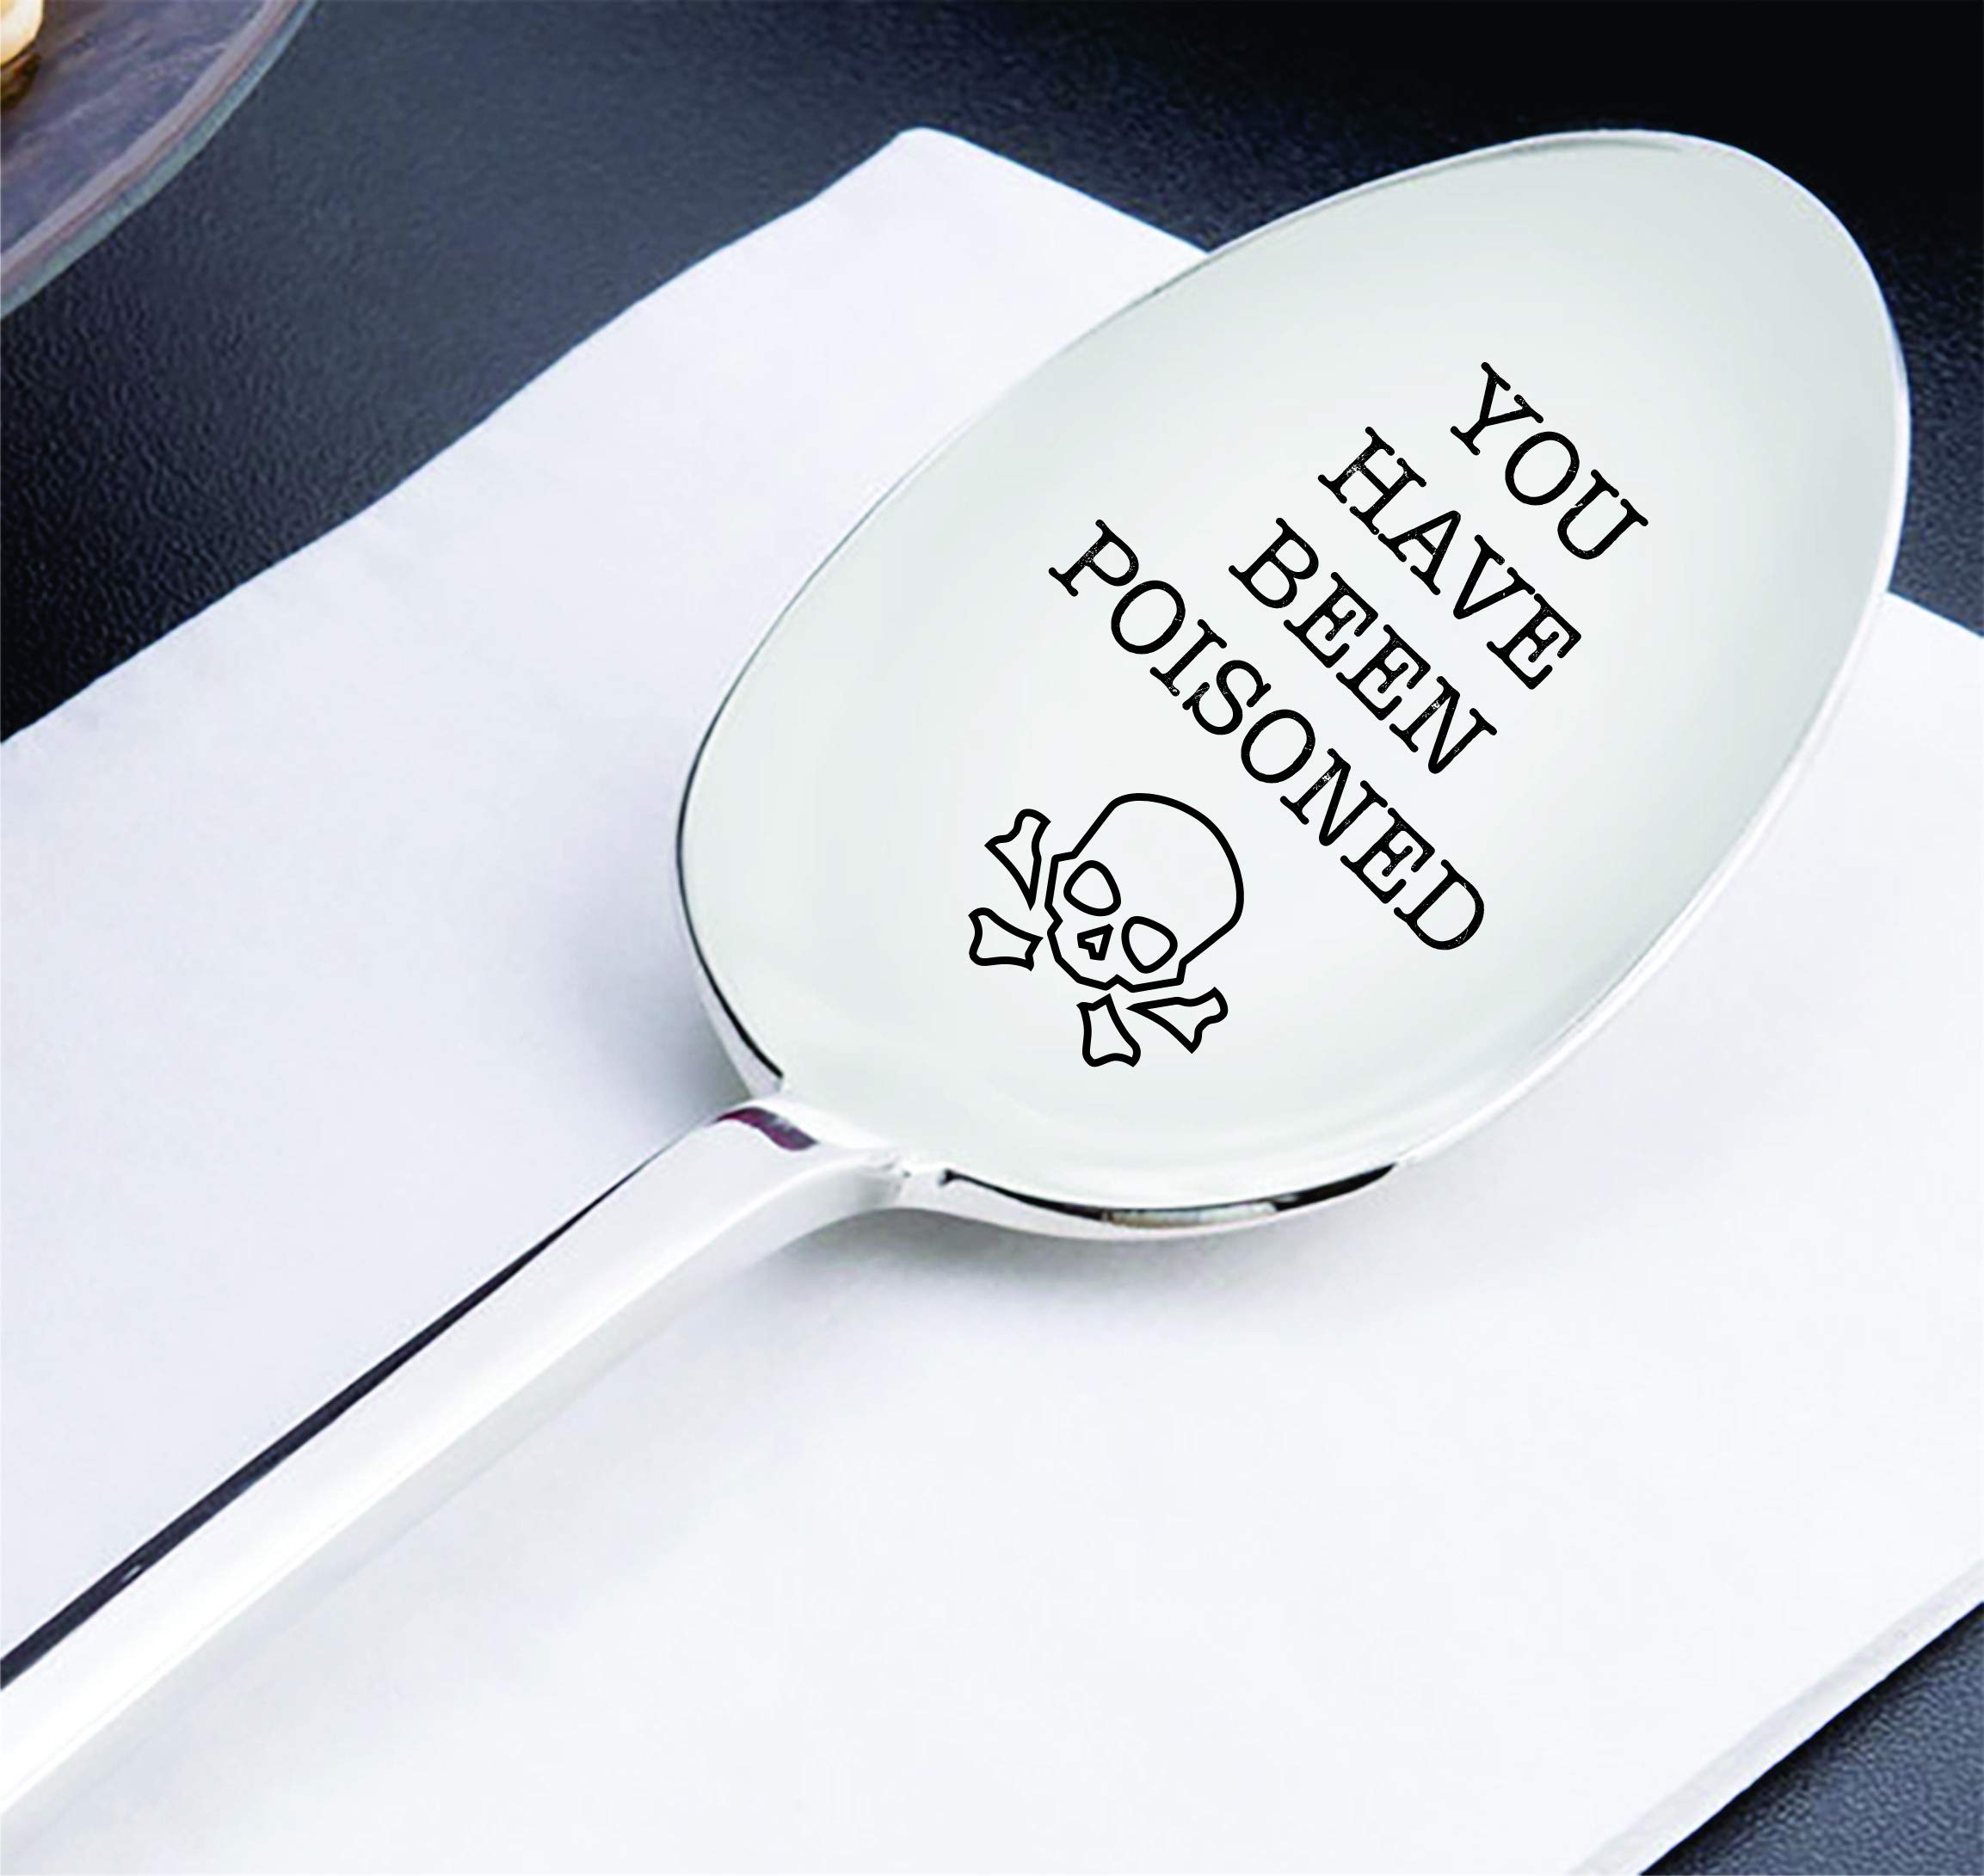 Poison - You Have Been Poisoned - Engraved Spoon - Skull Crossbones Eat at Your Own Risk Funny Spoon Gift - Spoon Gifts - Friends Gifts